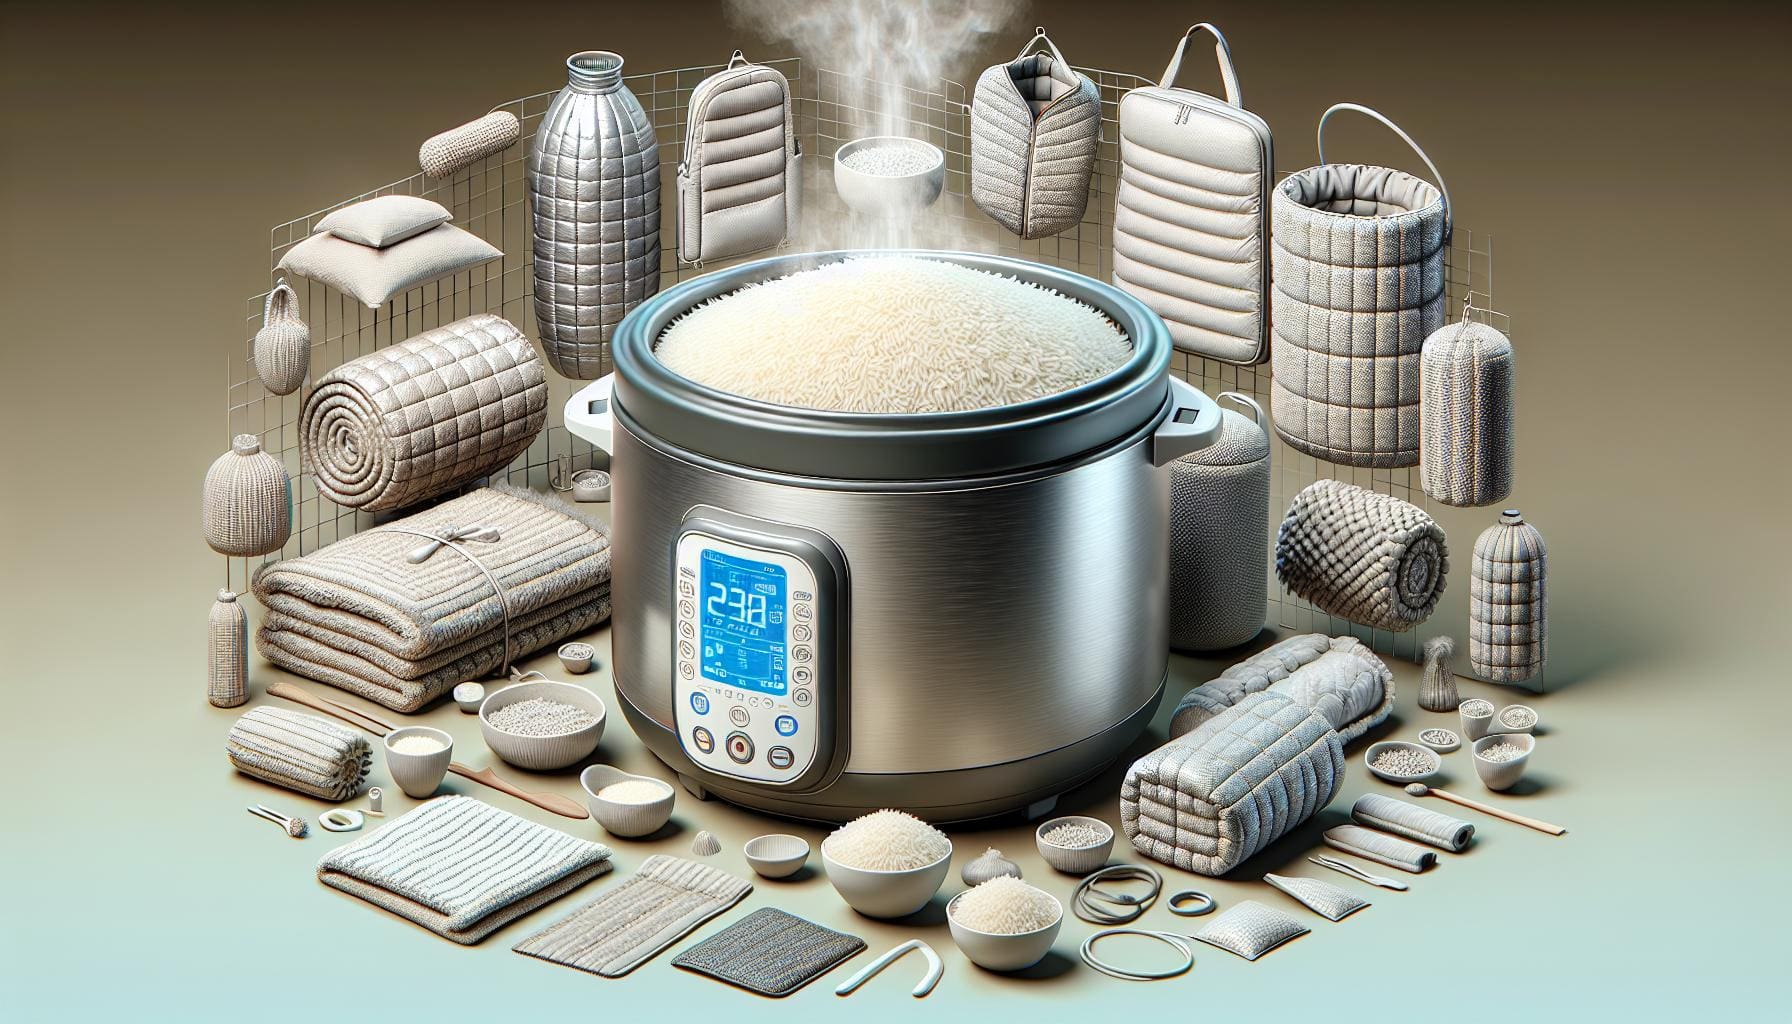 Keep Warm Function of Rice Cooker: Tips & Tricks for All Skill Levels